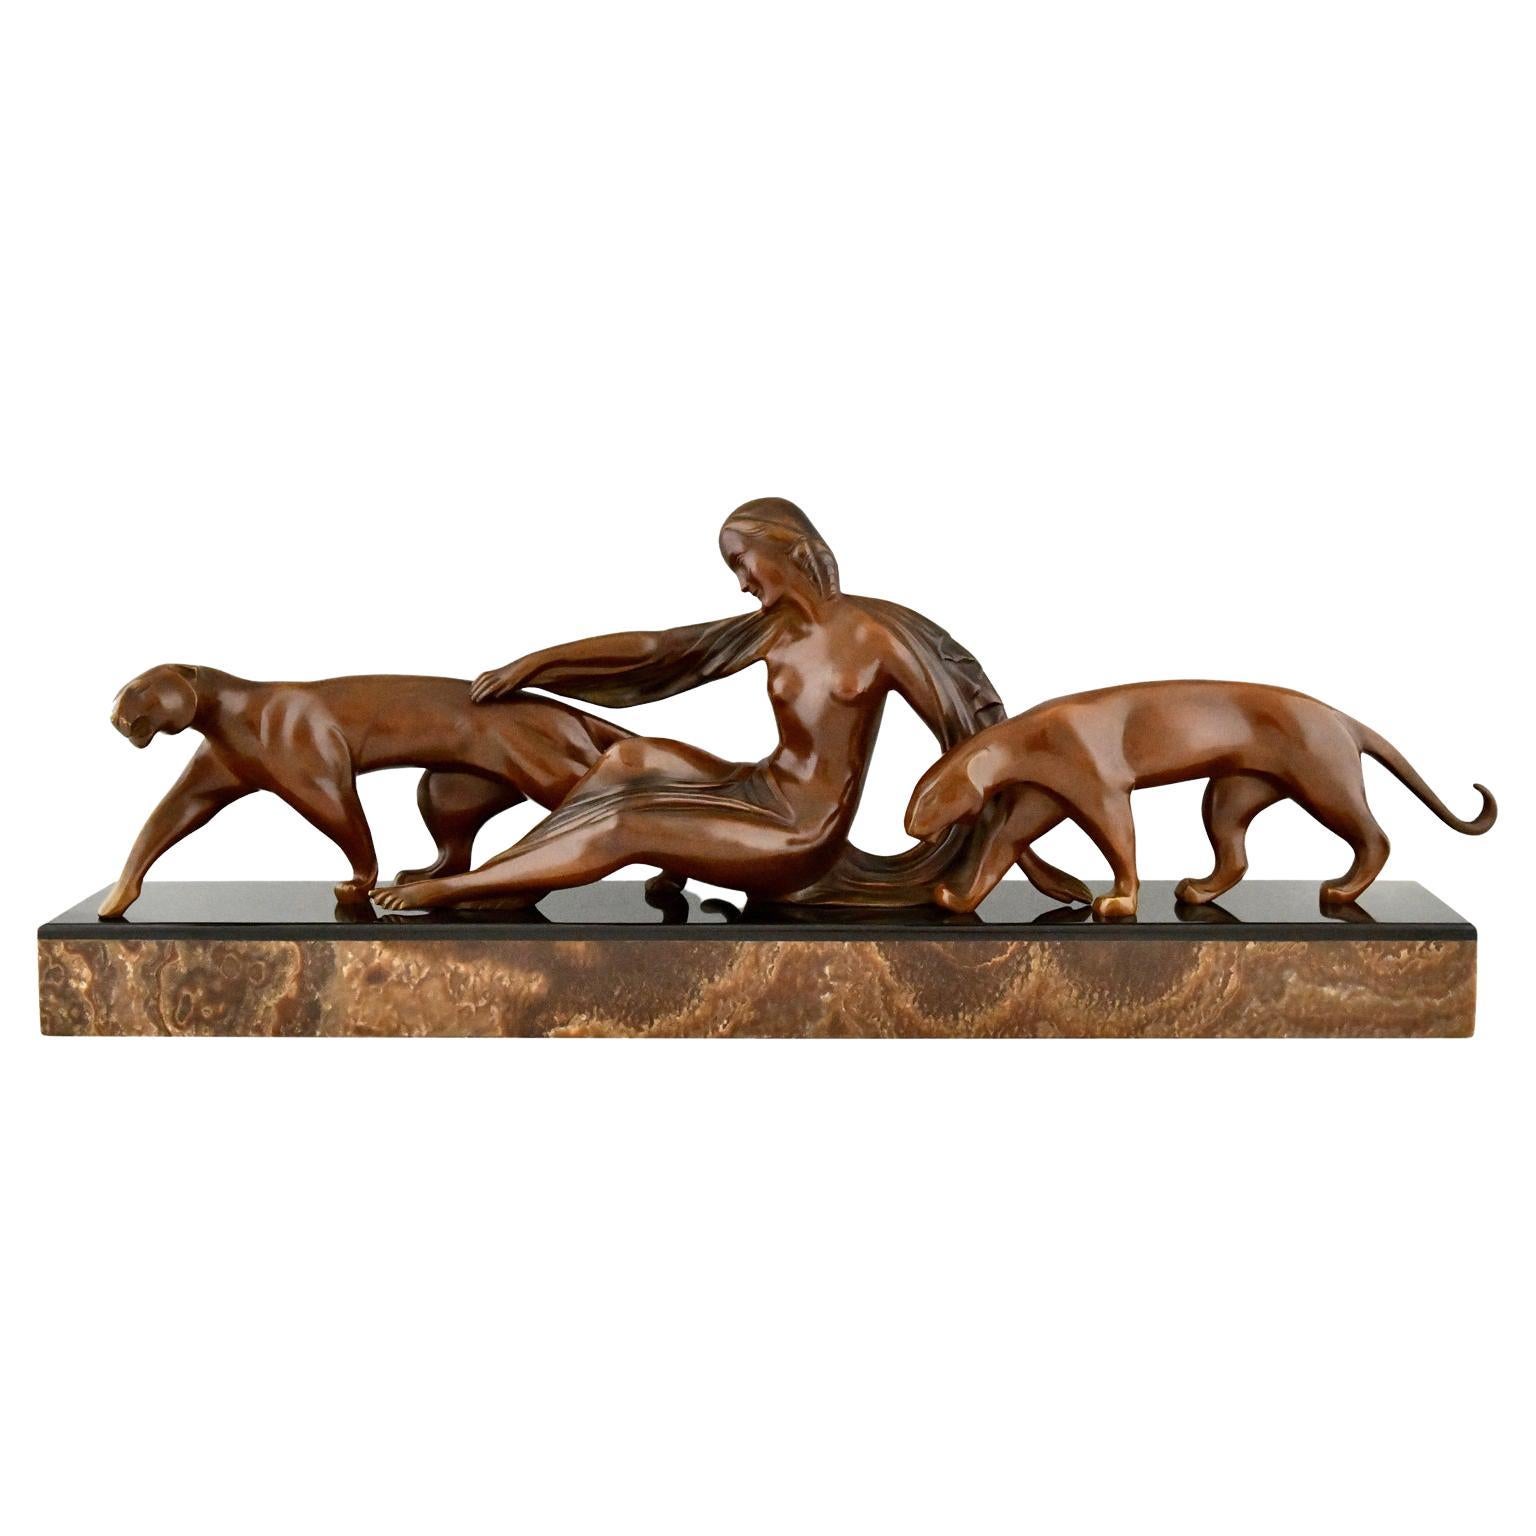 Art Deco Bronze Sculpture Lady with Two Panthers by Michel Decoux 1920